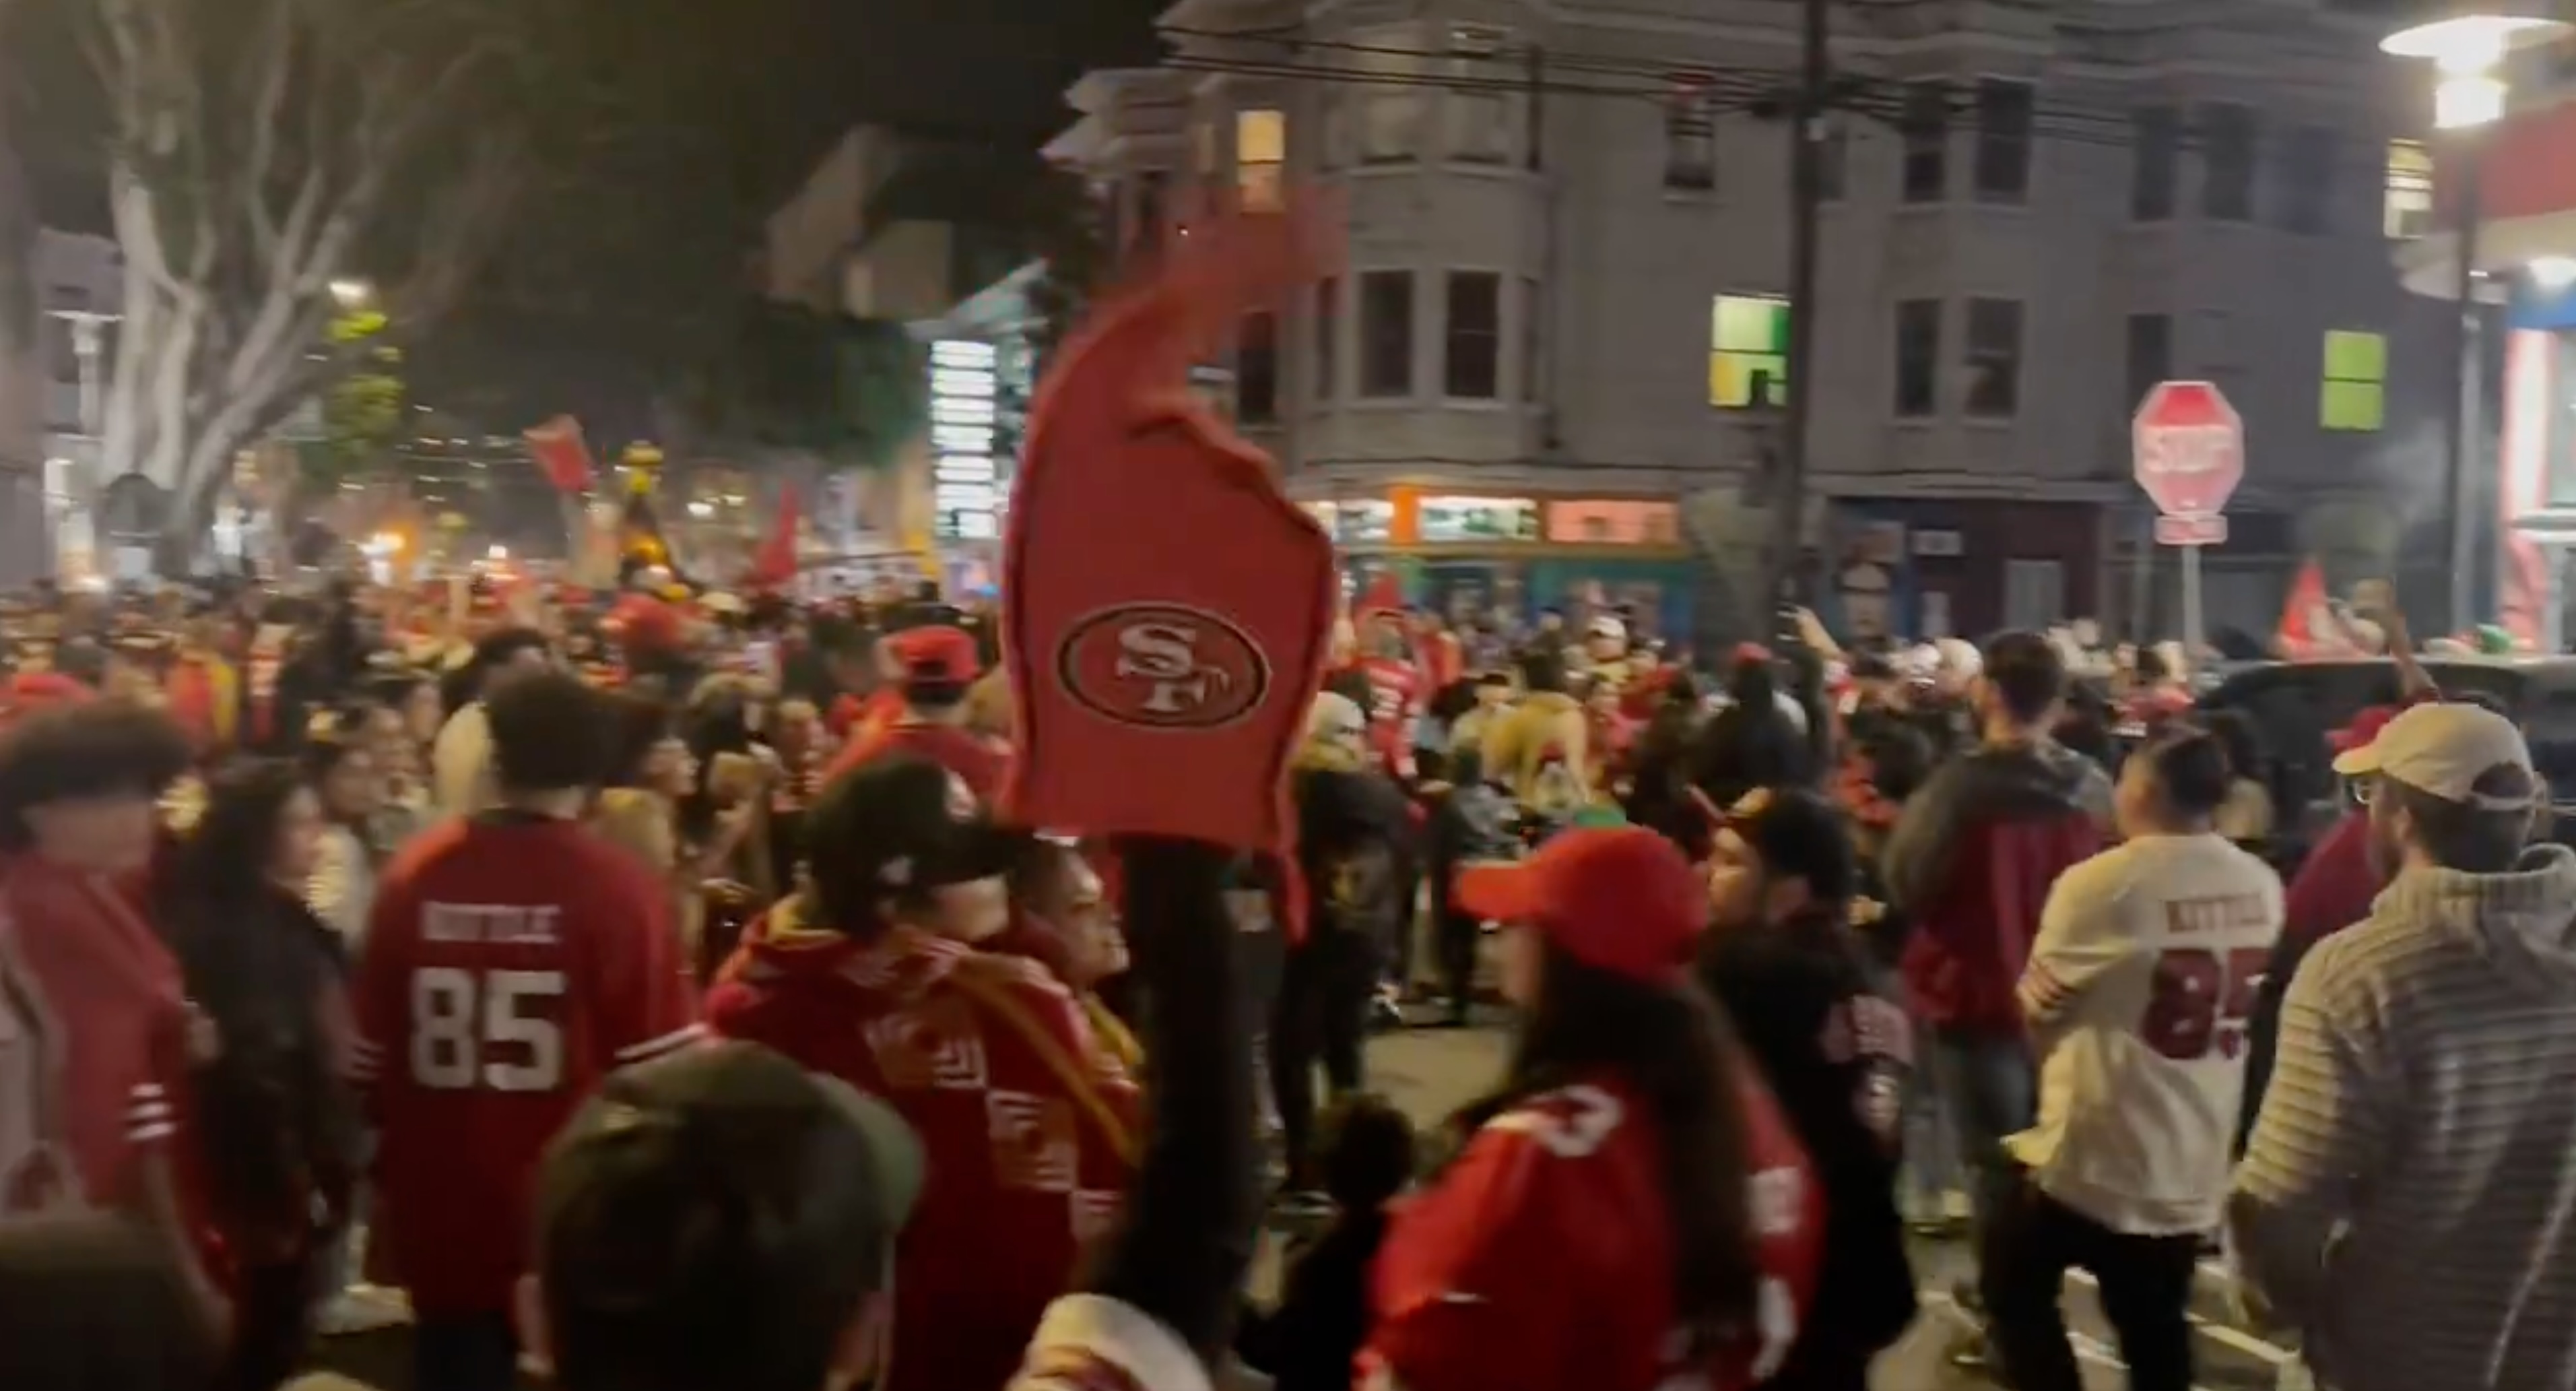 A crowd of red and gold clad sports fans celebrate in a city intersection.